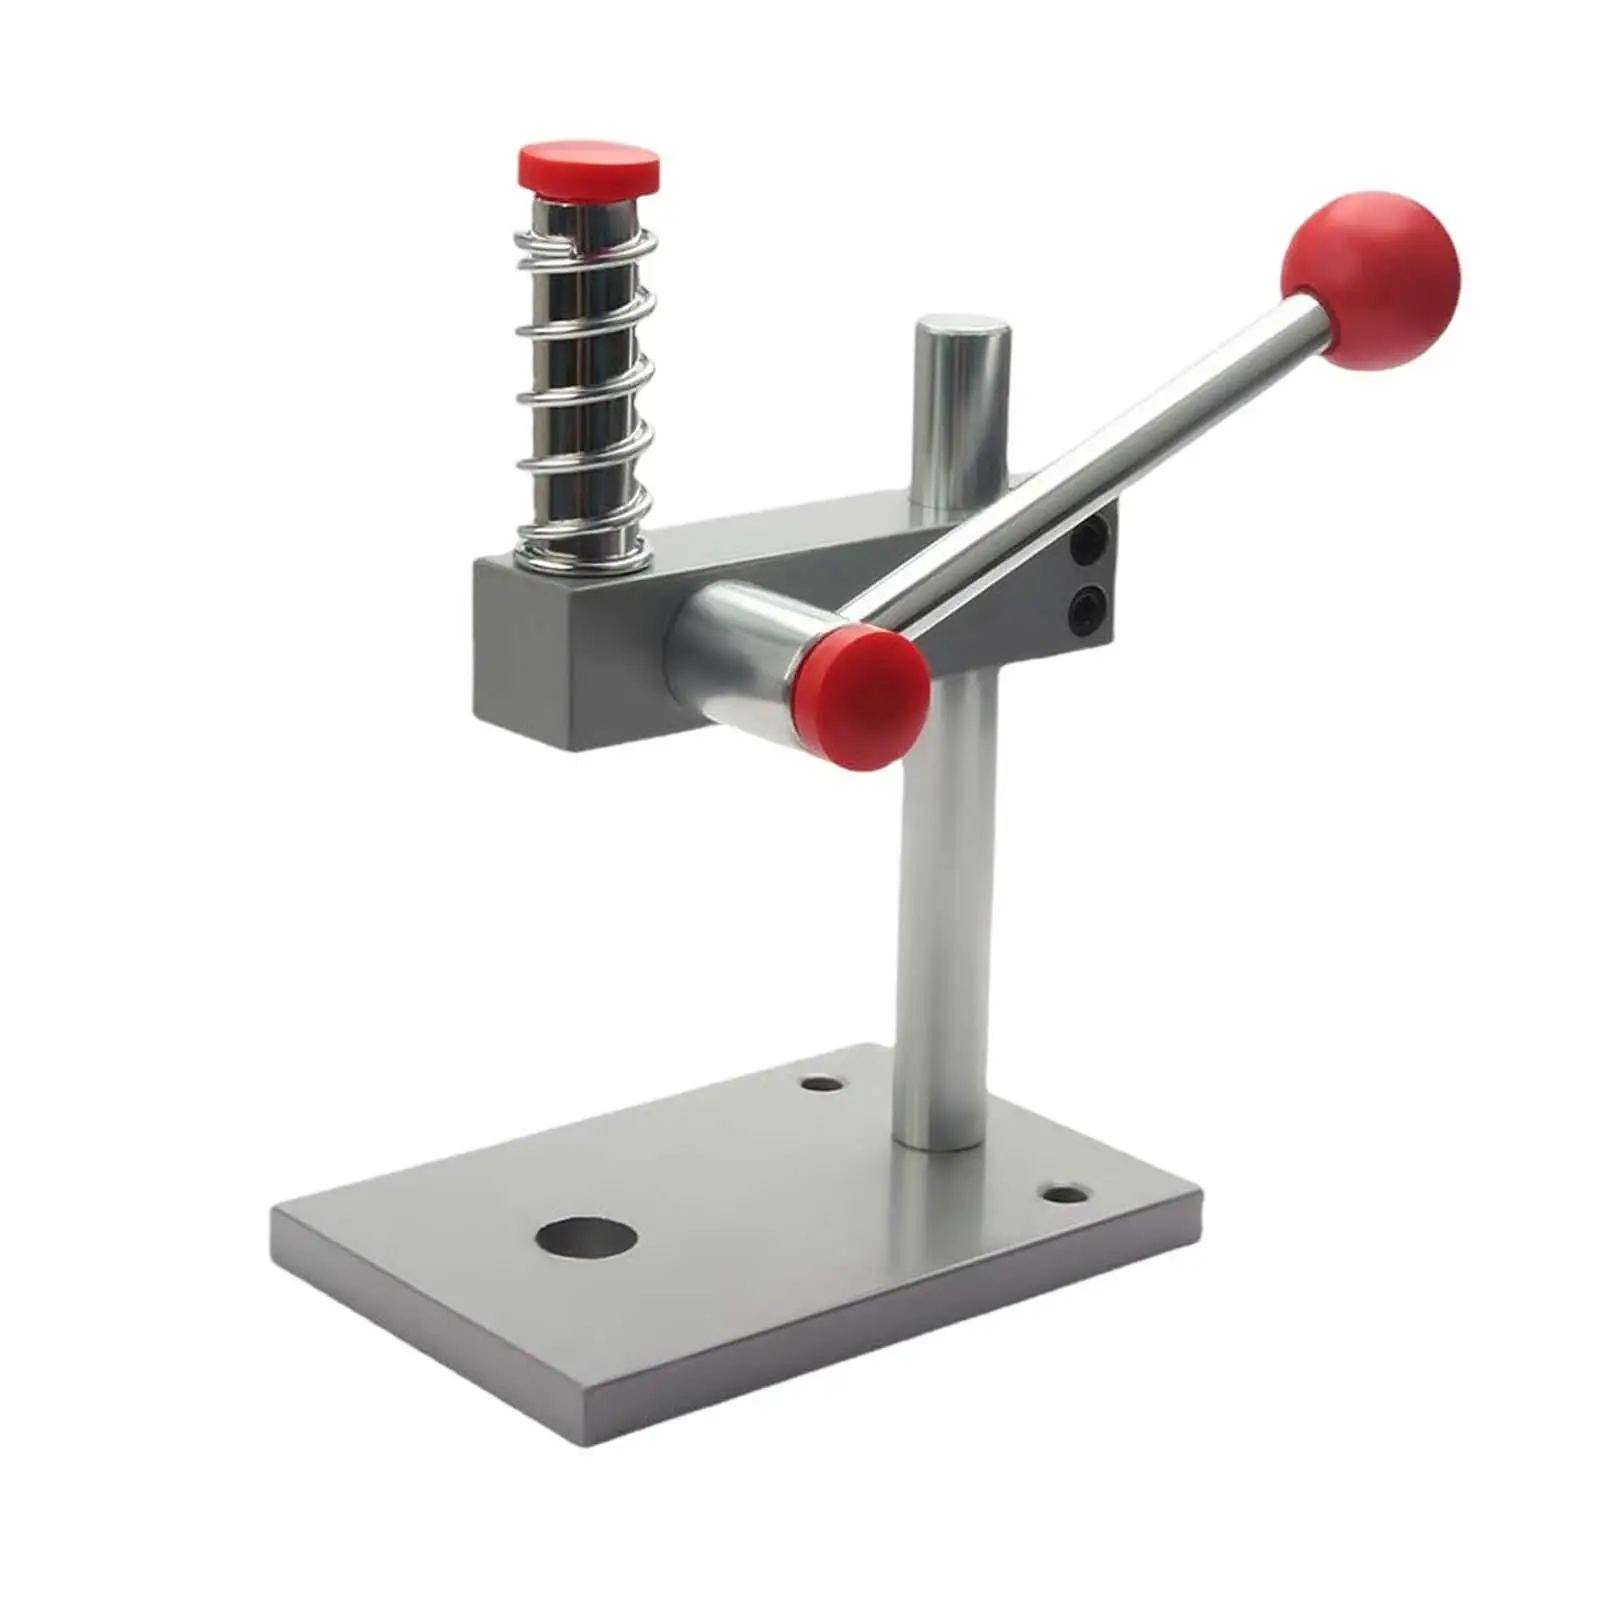 Button Maker Machine DIY Adjustable Height Easy to Operate Decorative Button Maker Making Tool